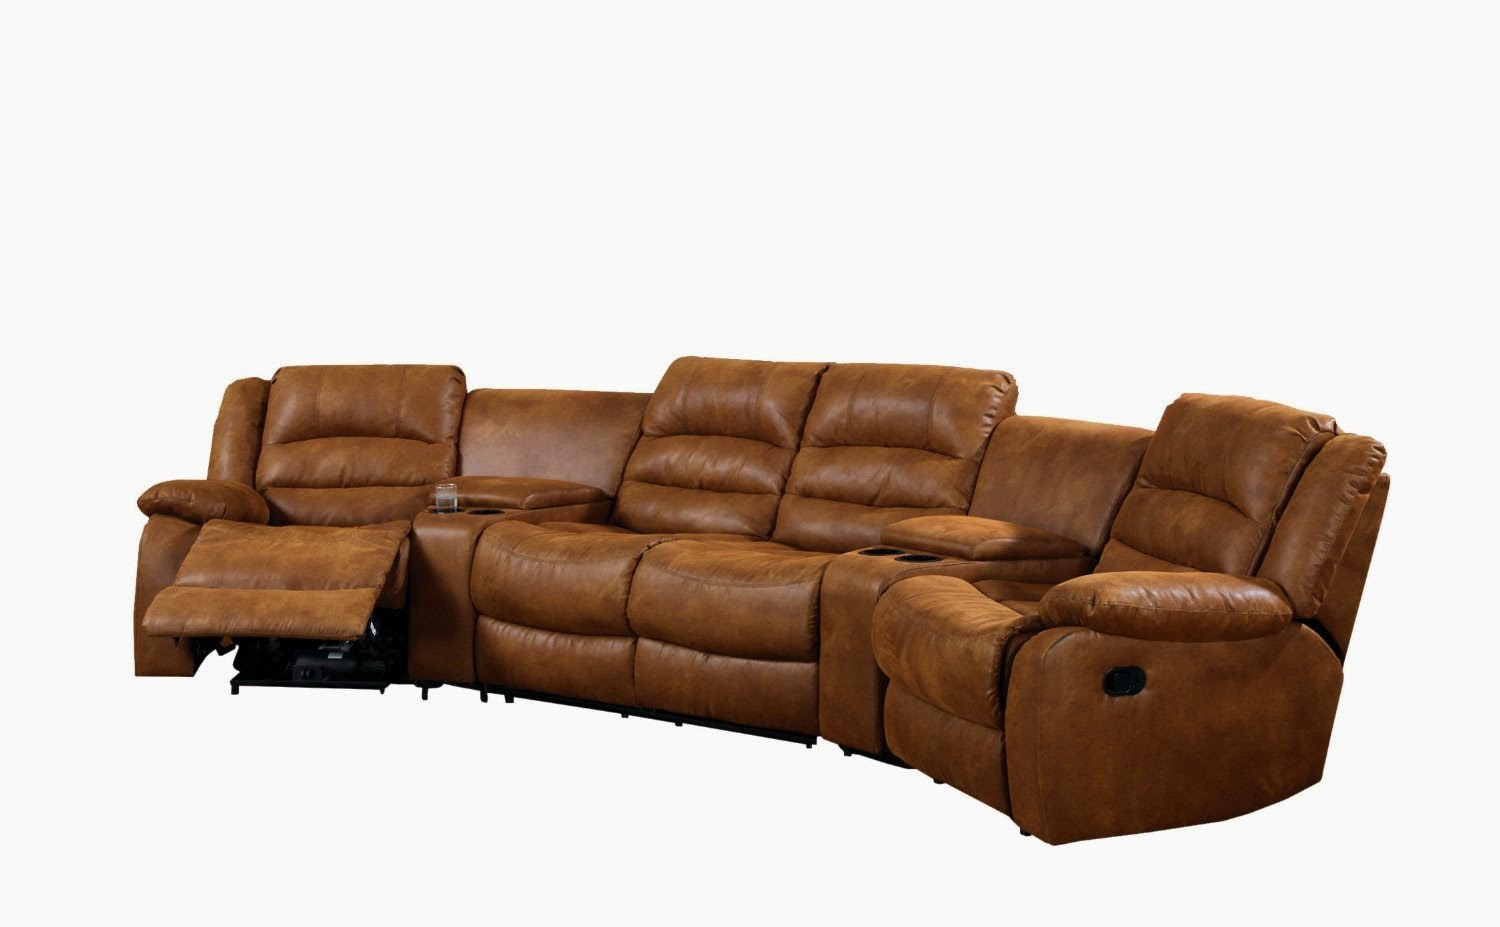 curved leather sofa with recliner